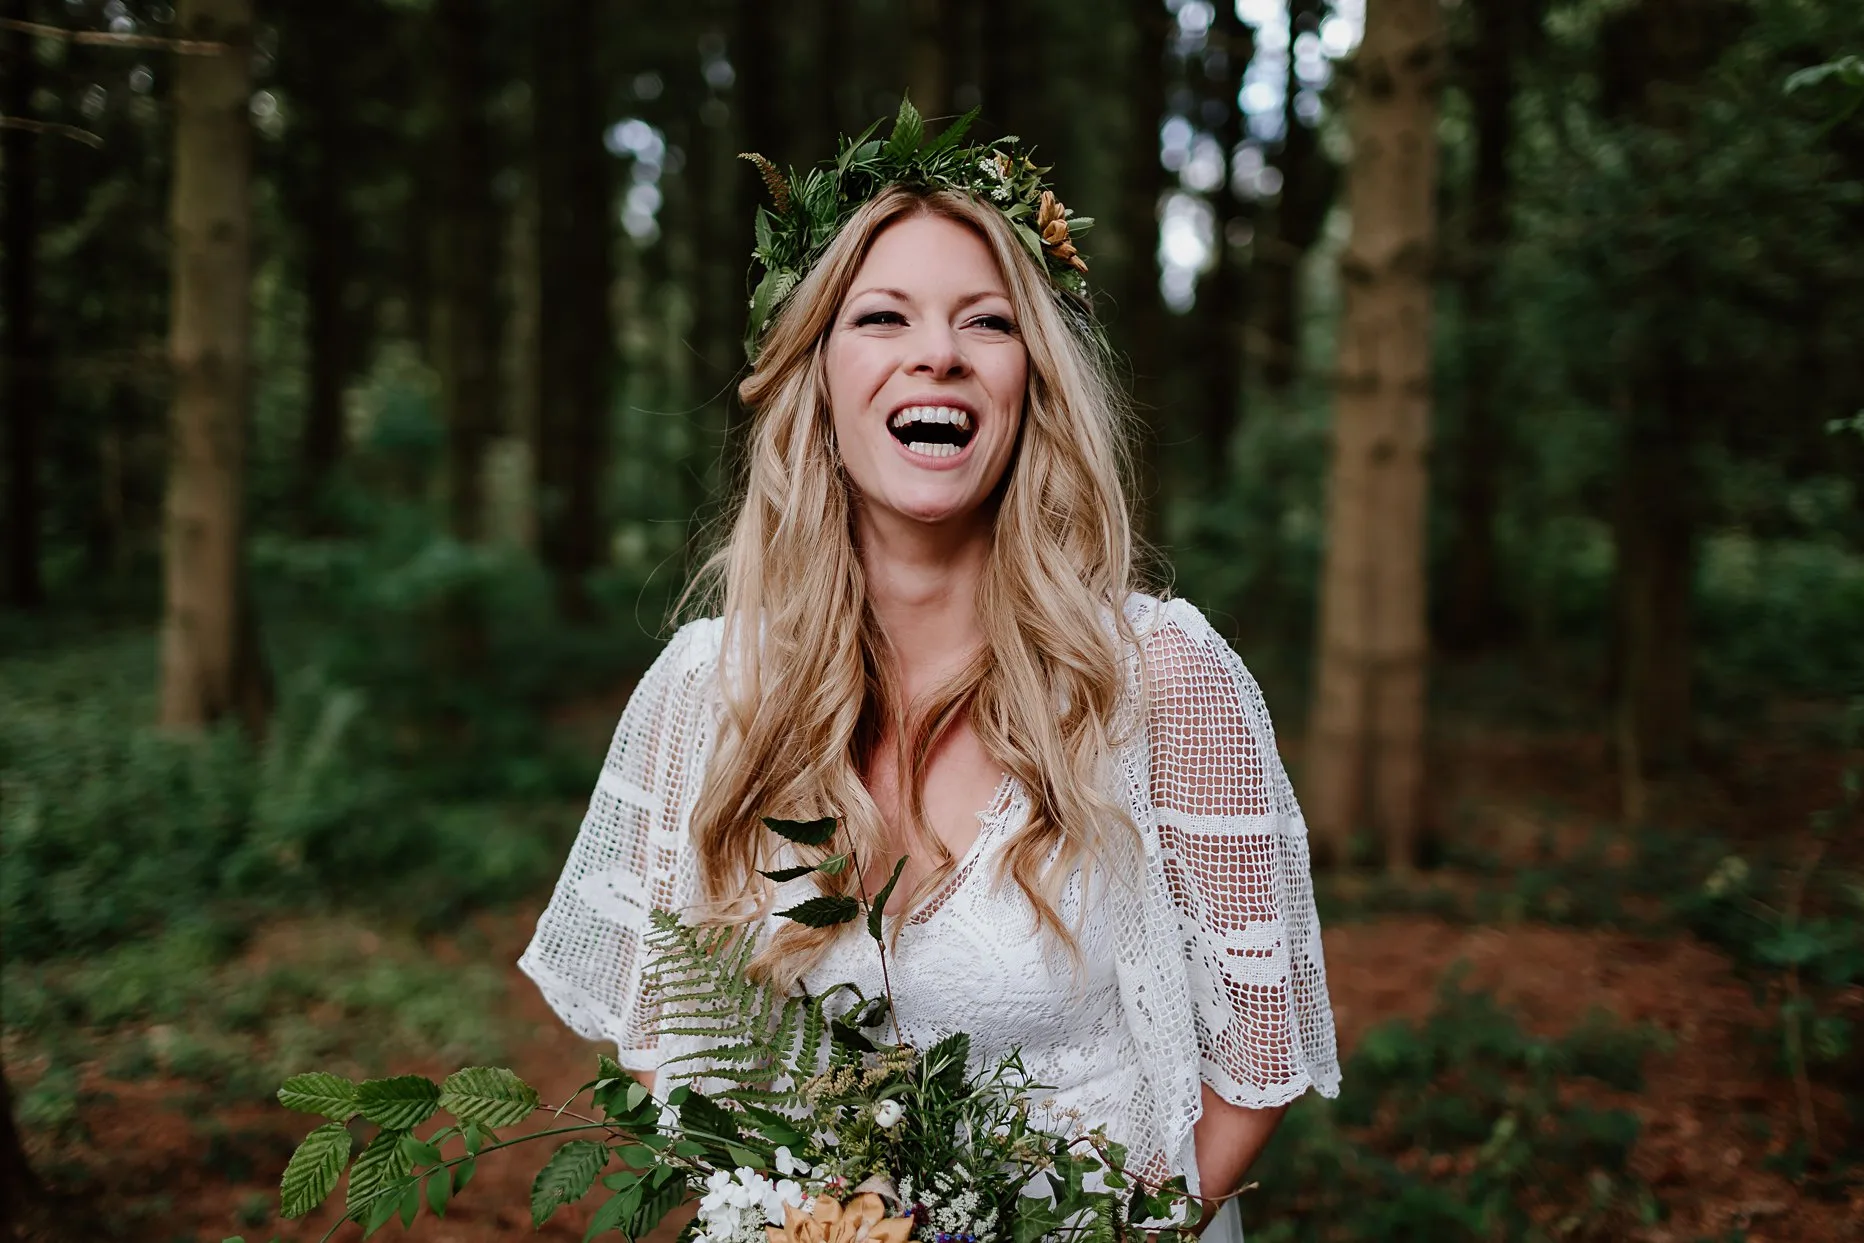 Natural photograph of a bride laughing in the woods at camp katur. She is wearing a foliage flower-crown and a white crochet boho wedding dress.